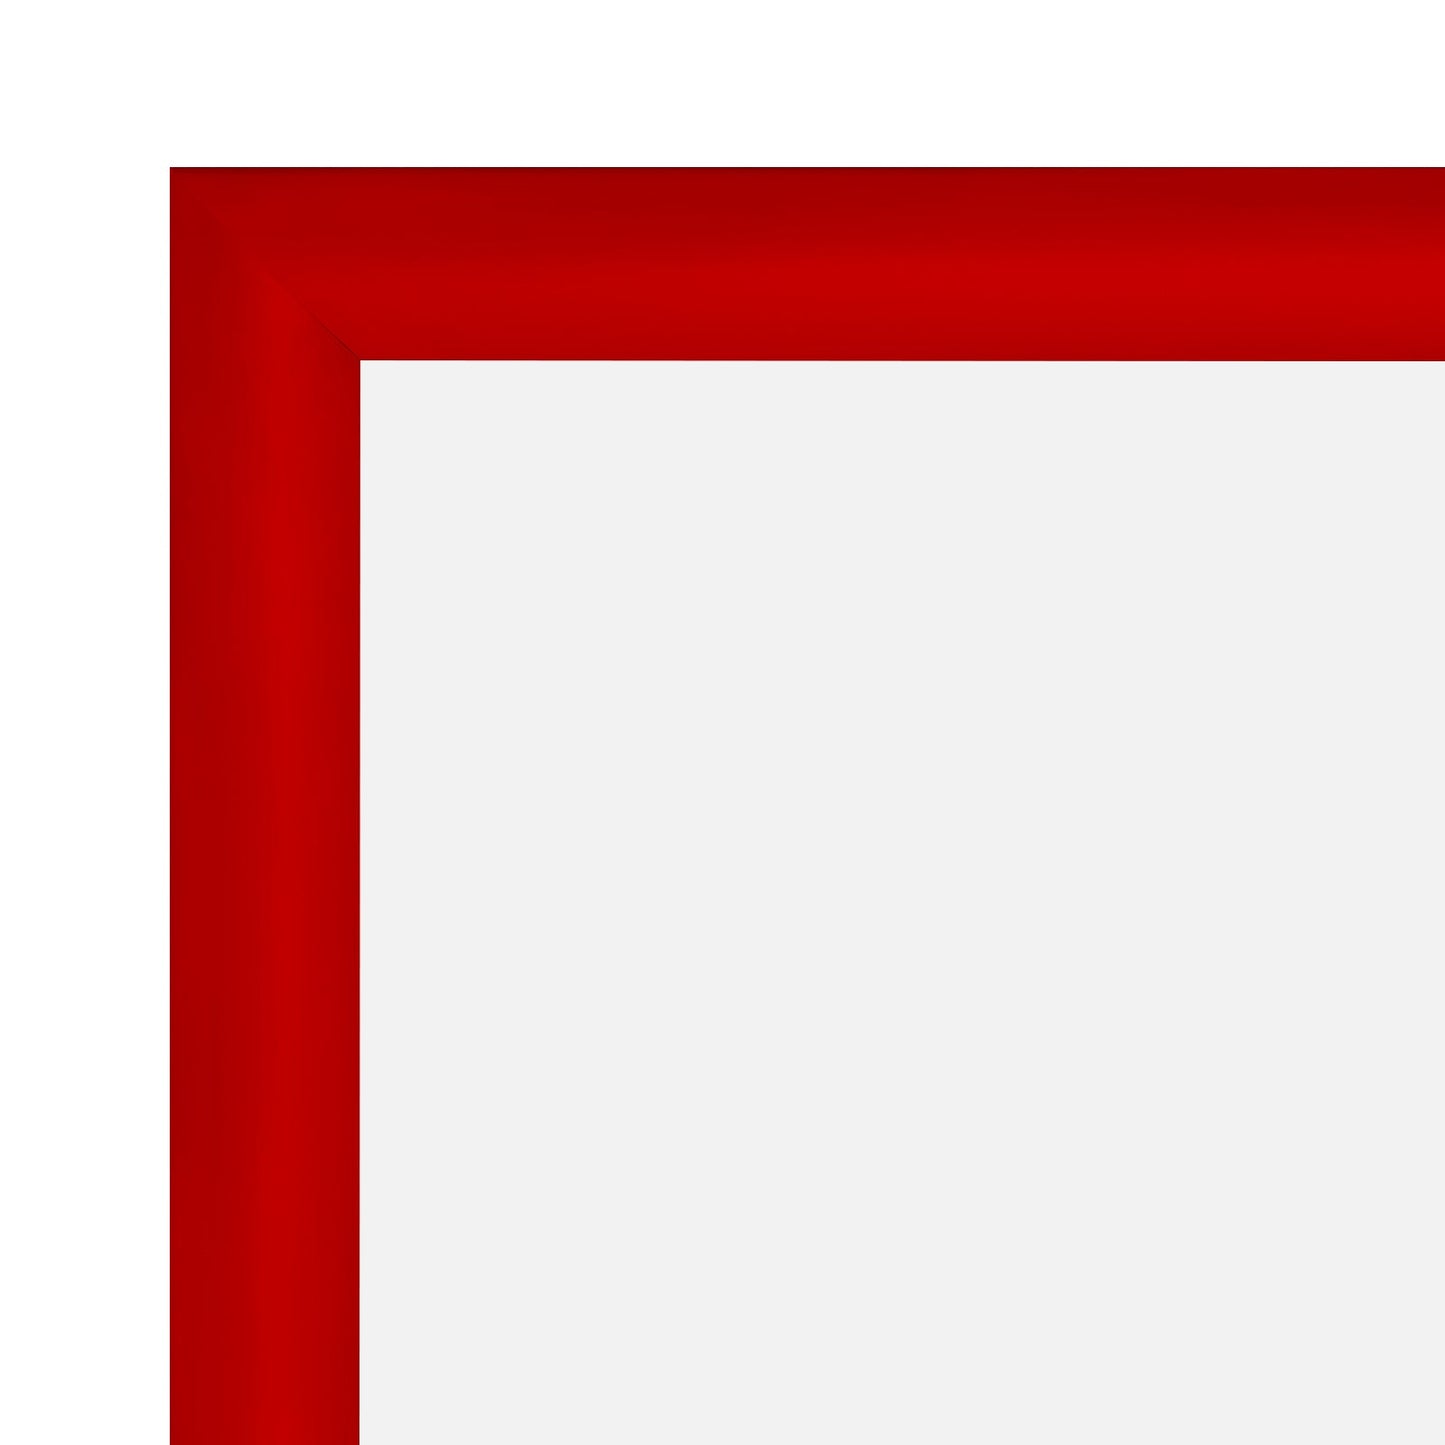 20x24  TRADEframe Red Snap Frame 20x24 - 1.2 inch profile - Snap Frames Direct